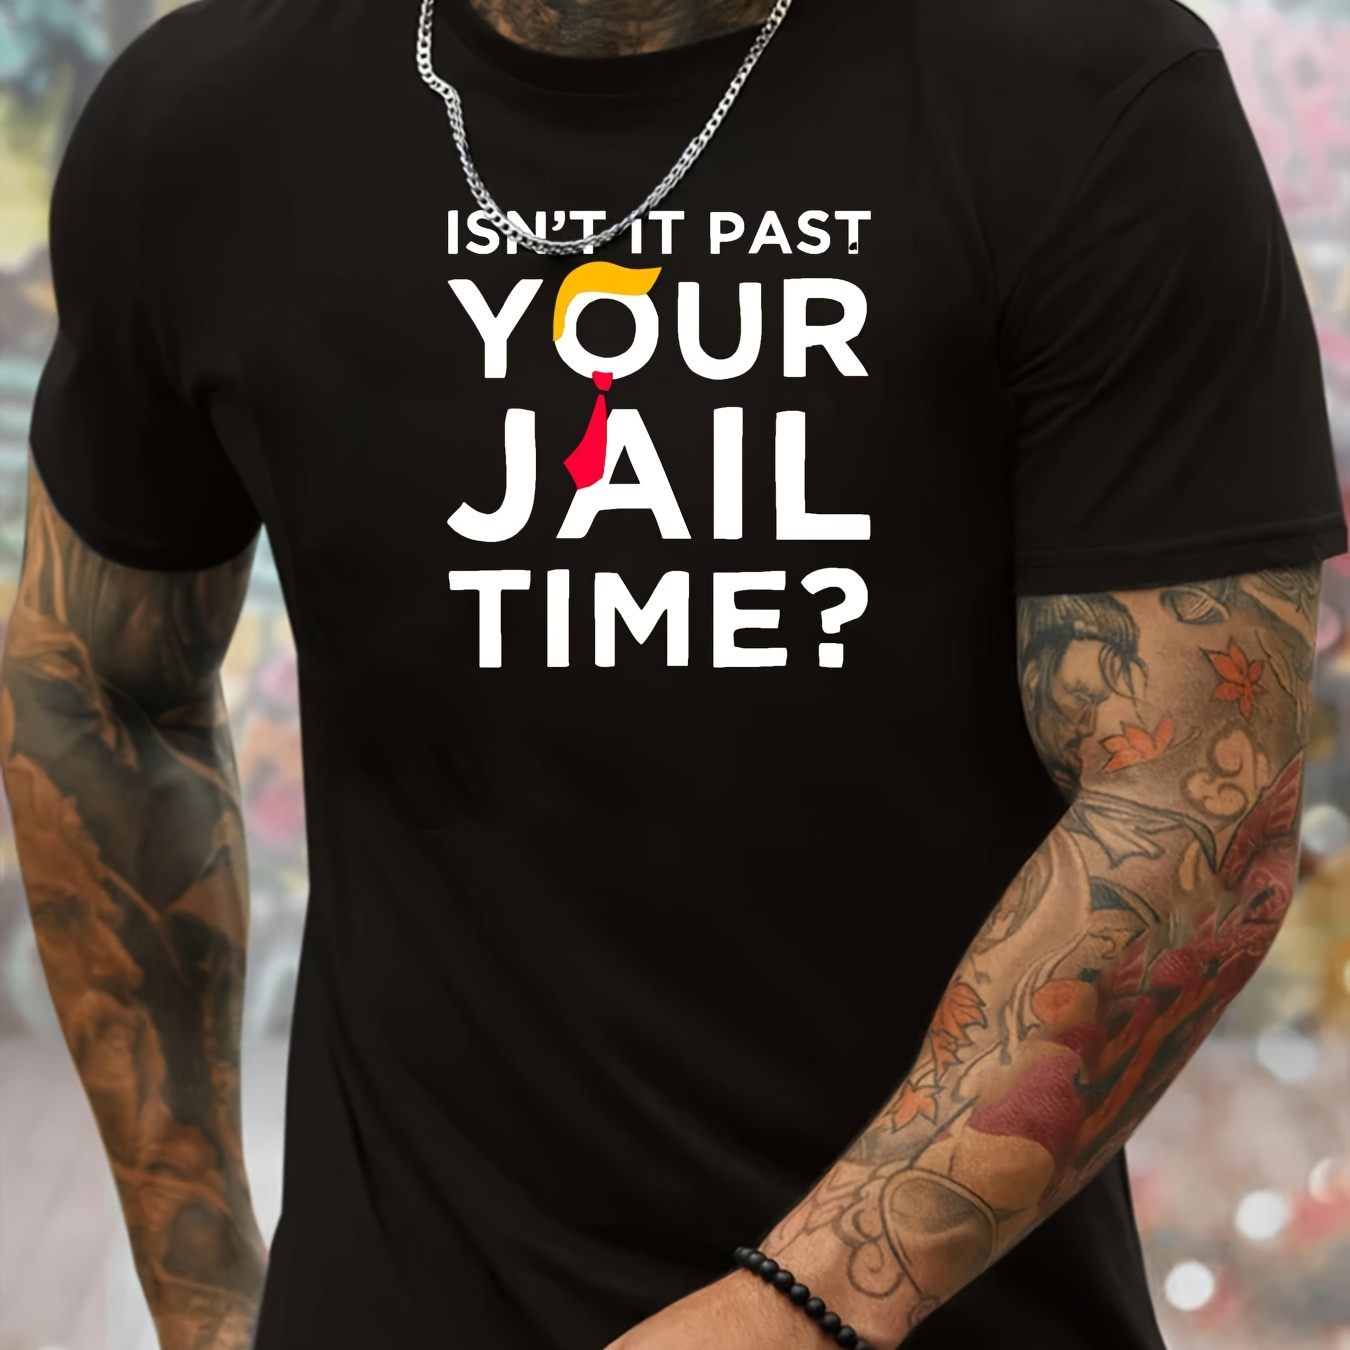 

Isn't It Past Your Jail Time Print Men's Casual Crew Neck Short Sleeve T-shirt For Summer, Stylish & Breathable Street Fashion, Versatile Lightweight Comfy Top